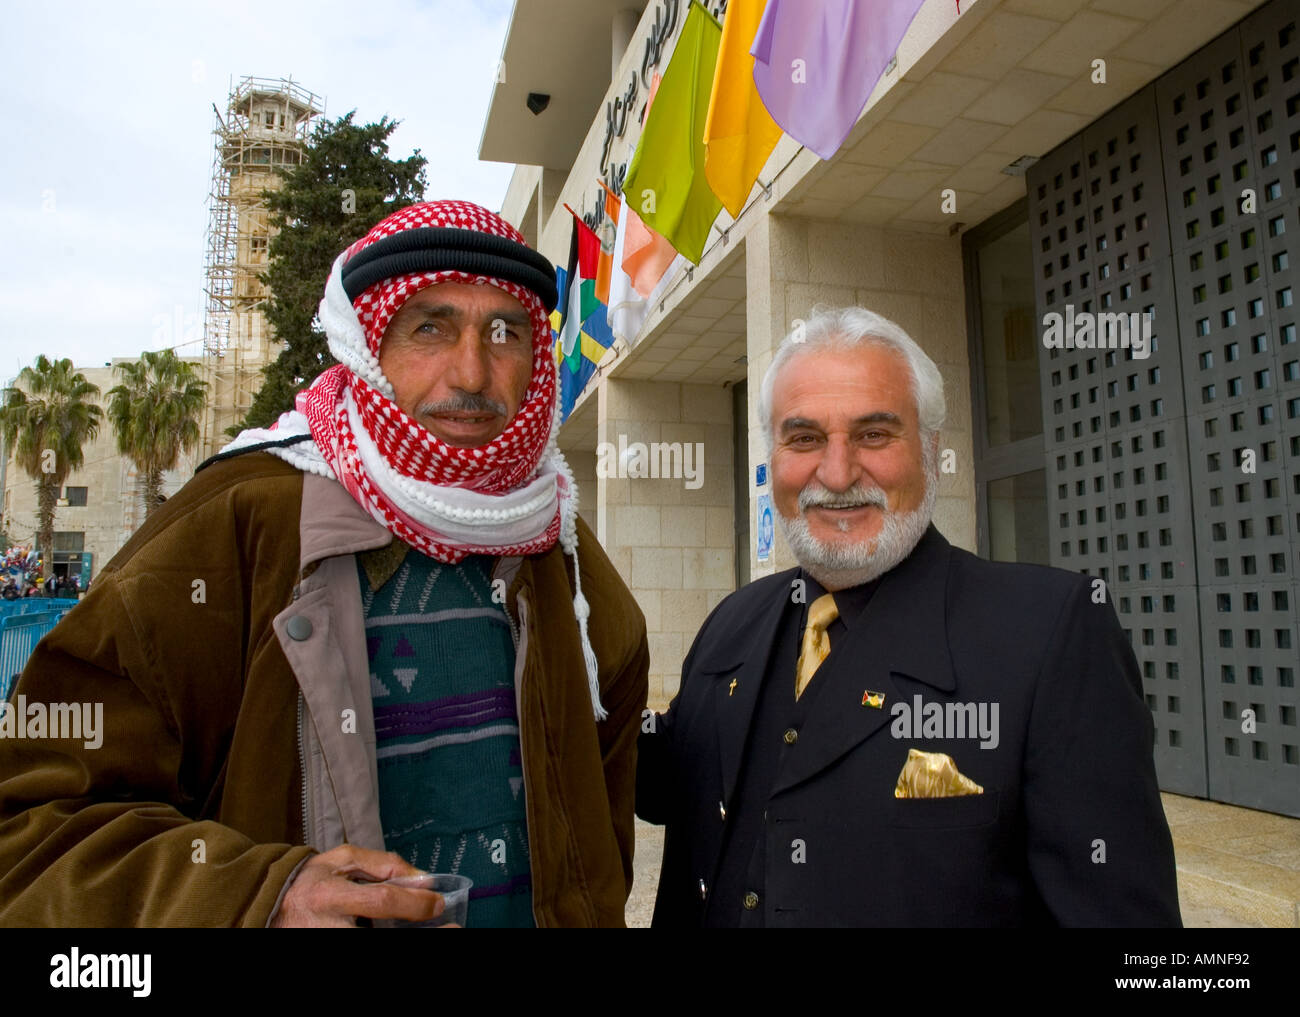 Palestinian Authority Bethlehem Manger Square portrait of an elegant christian man and a muslem wearing the keffieh both smilling Stock Photo